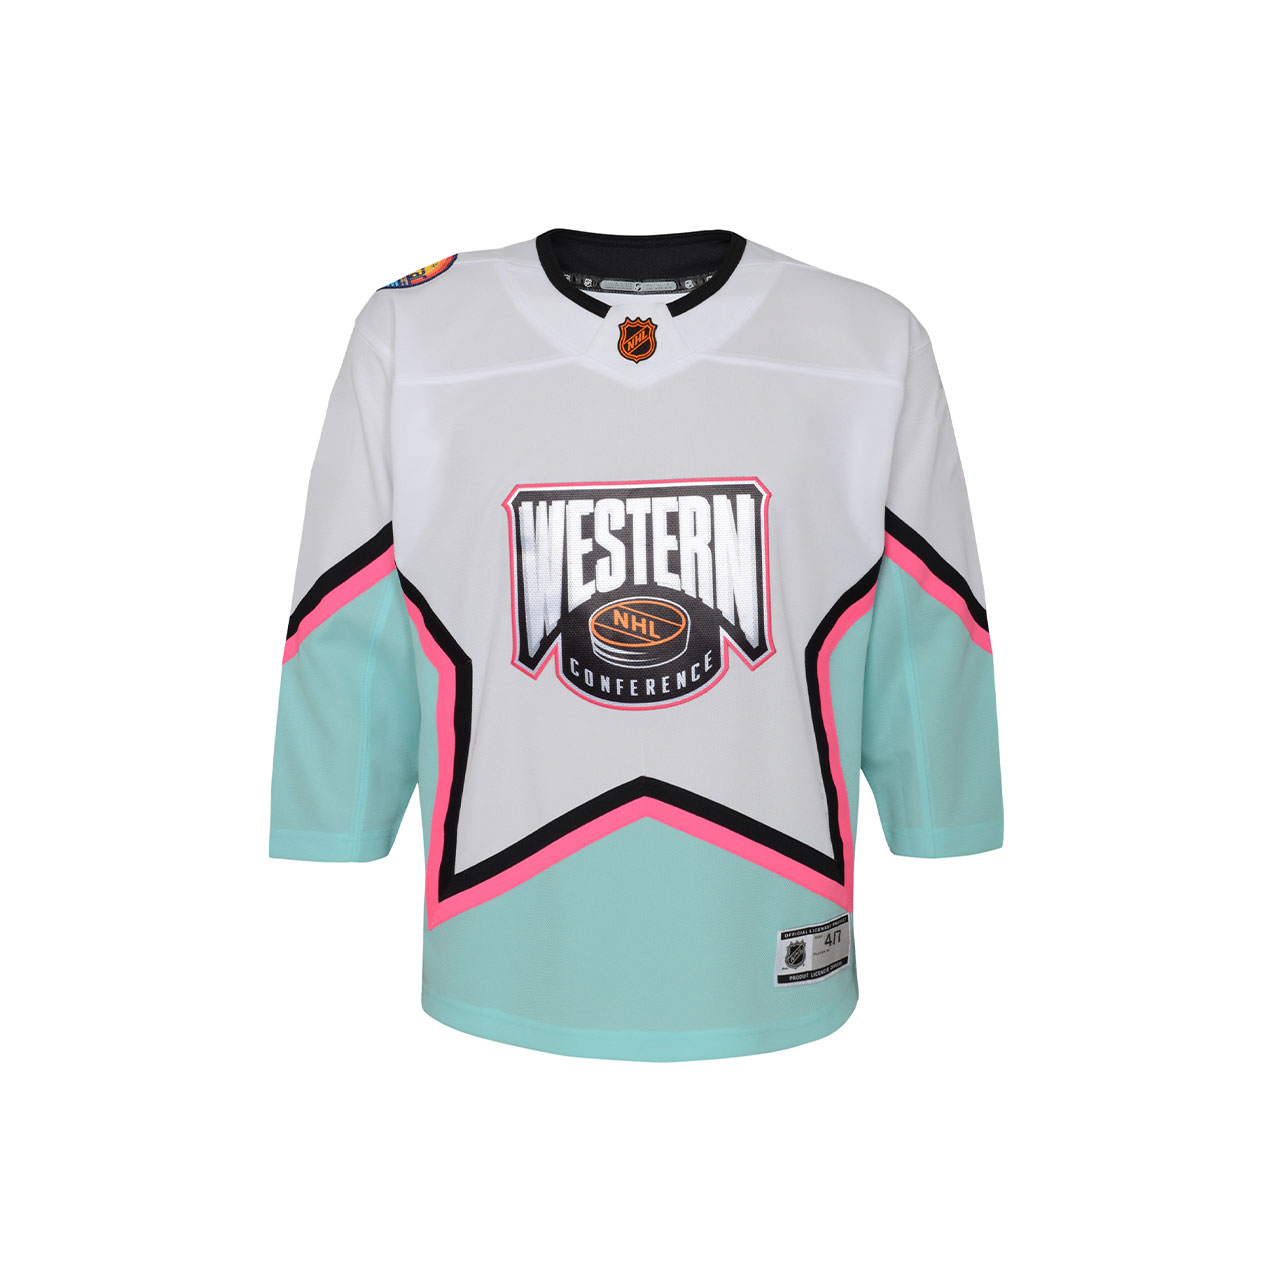 Youth Large Used All Star Club Jersey (Raleigh Capitals